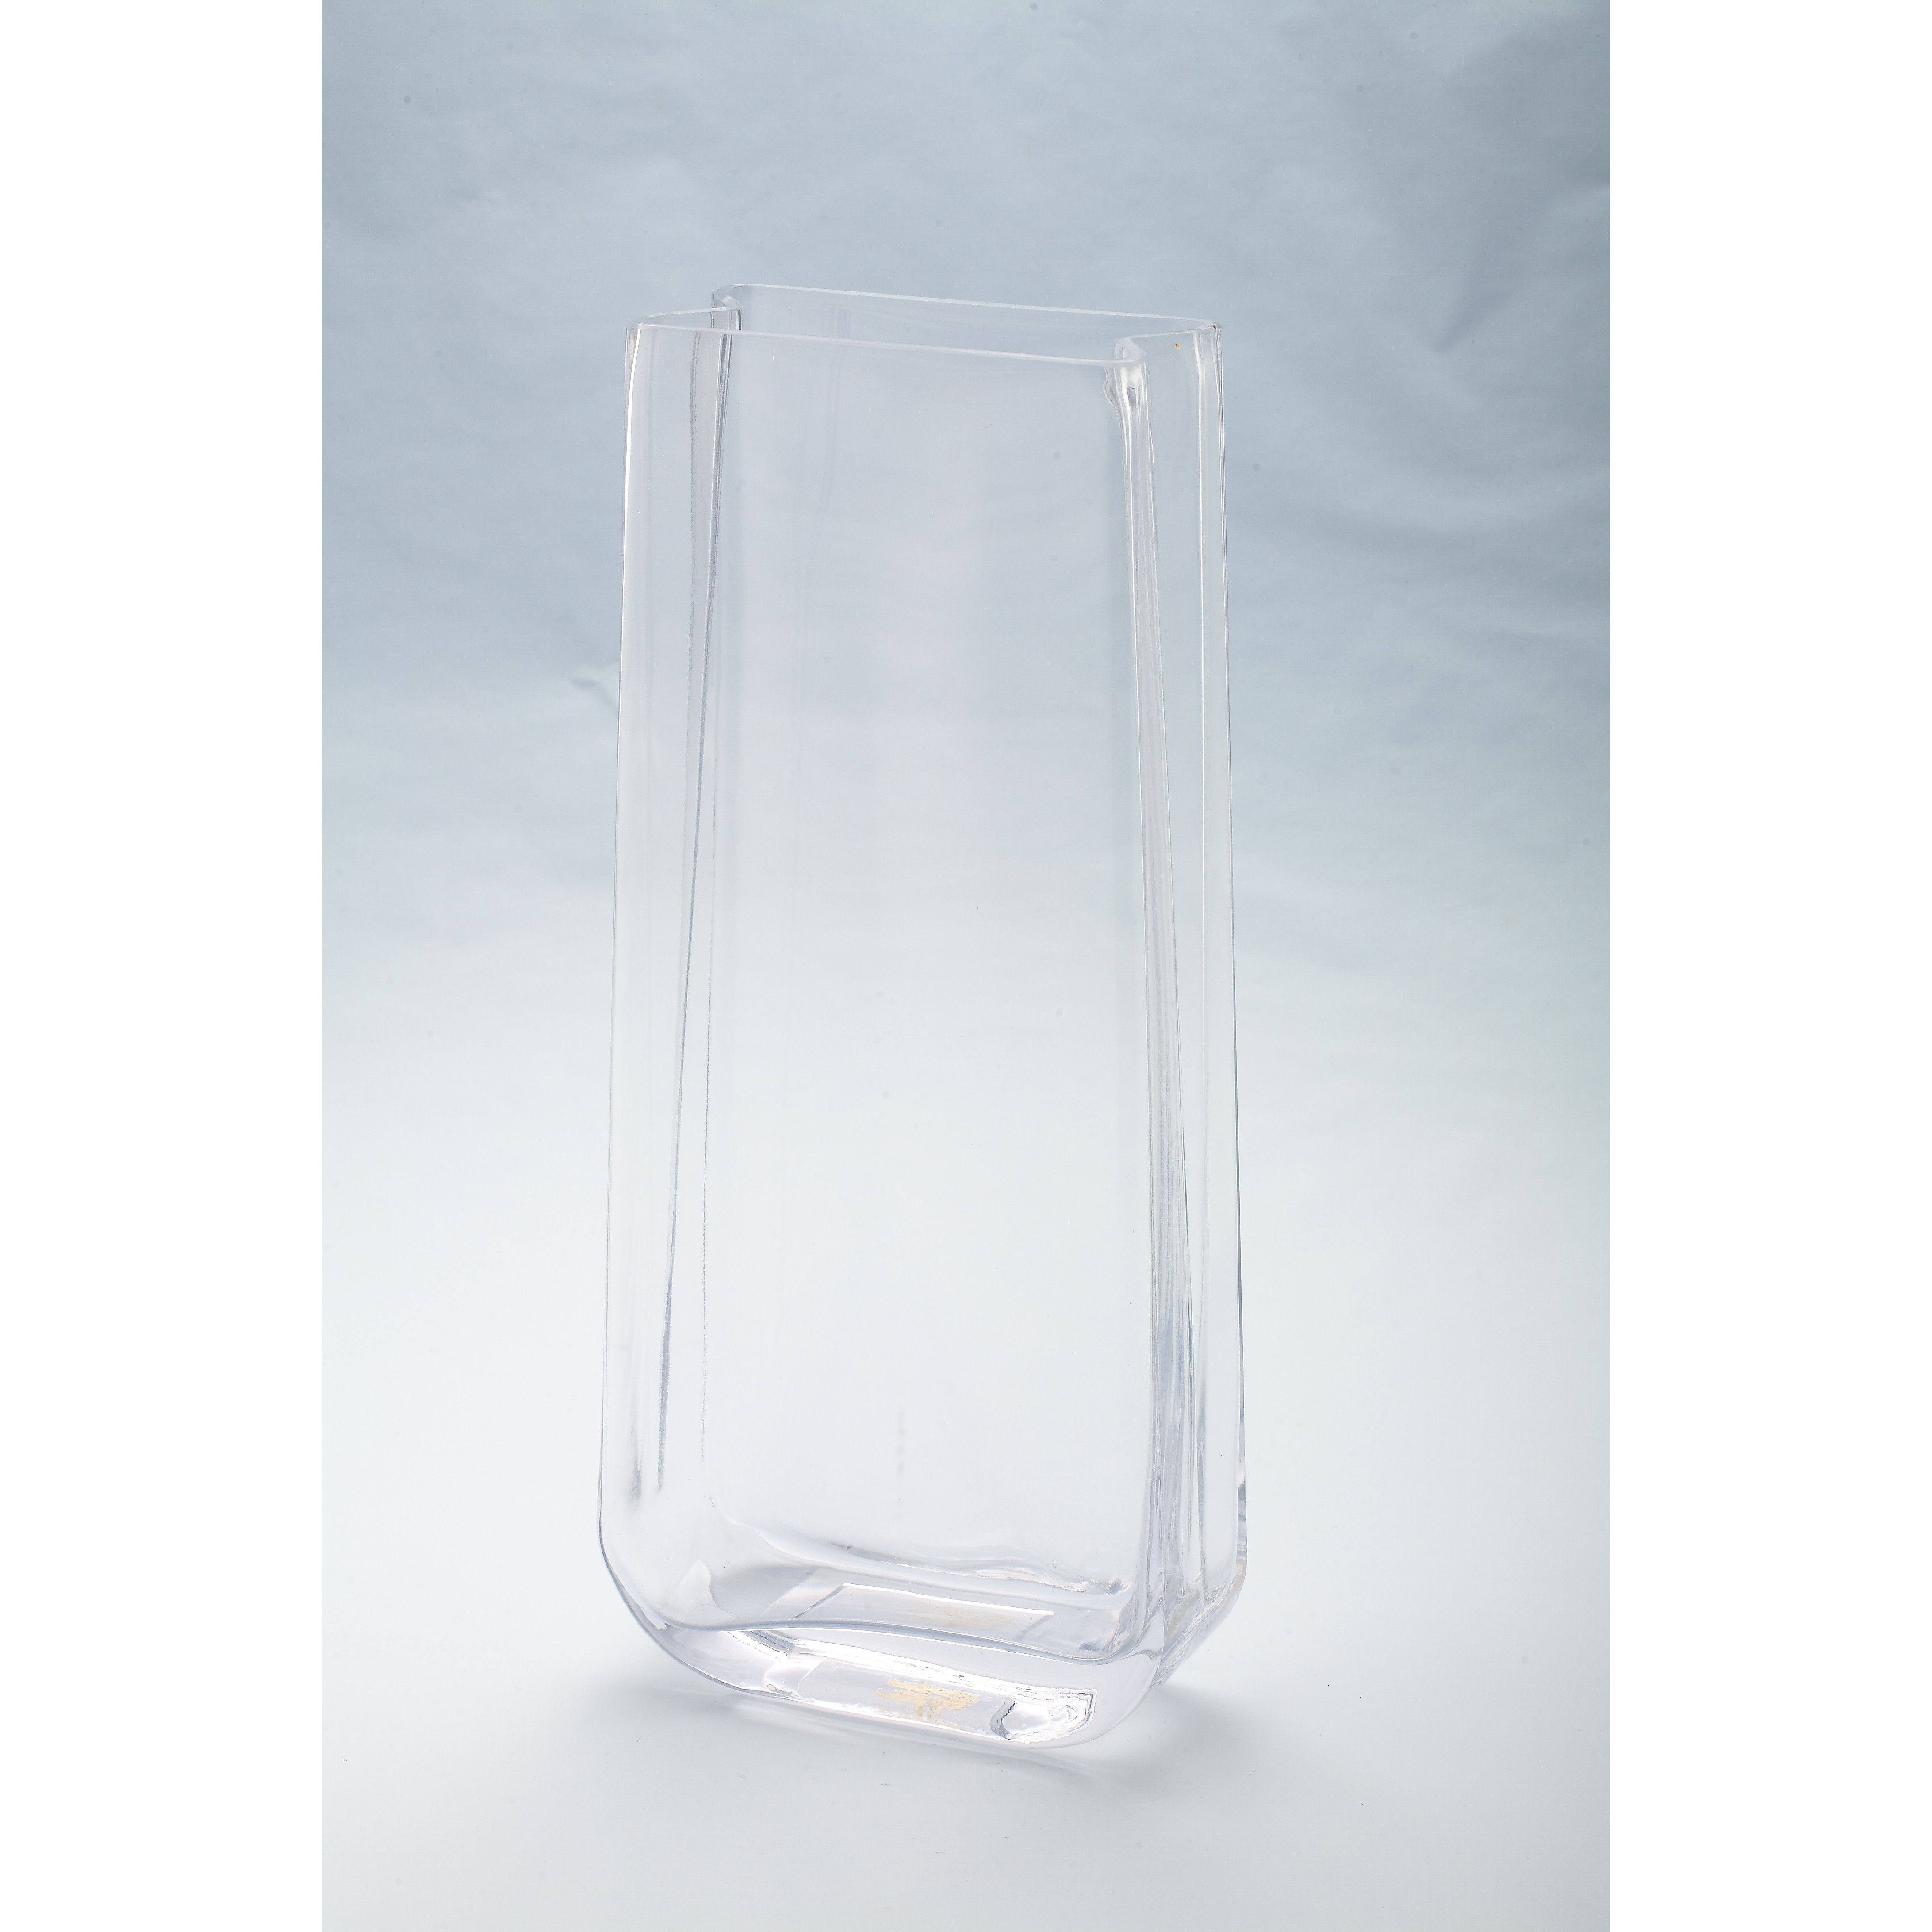 10 Lovable Amazon Clear Glass Vases 2024 free download amazon clear glass vases of gold mercury glass vases lovely diamond star glass vase wedding pertaining to gold mercury glass vases lovely diamond star glass vase wedding rental ideas pintere